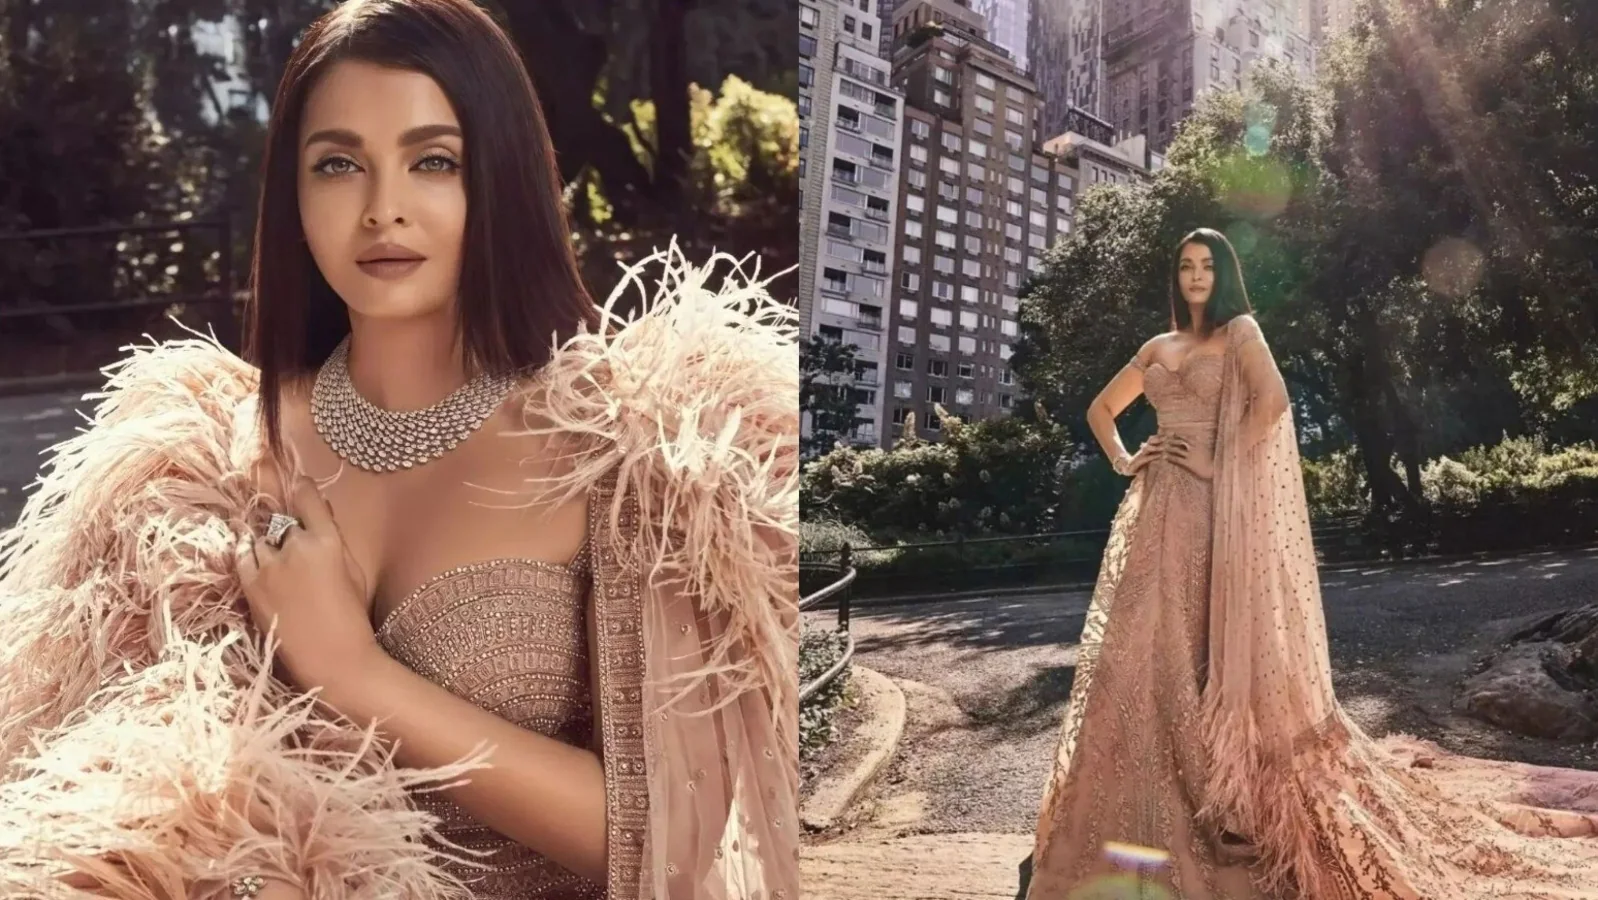 Fact check: These aren’t Aishwarya Rai’s pictures from Cannes Film Fest. Check out real first look photos here